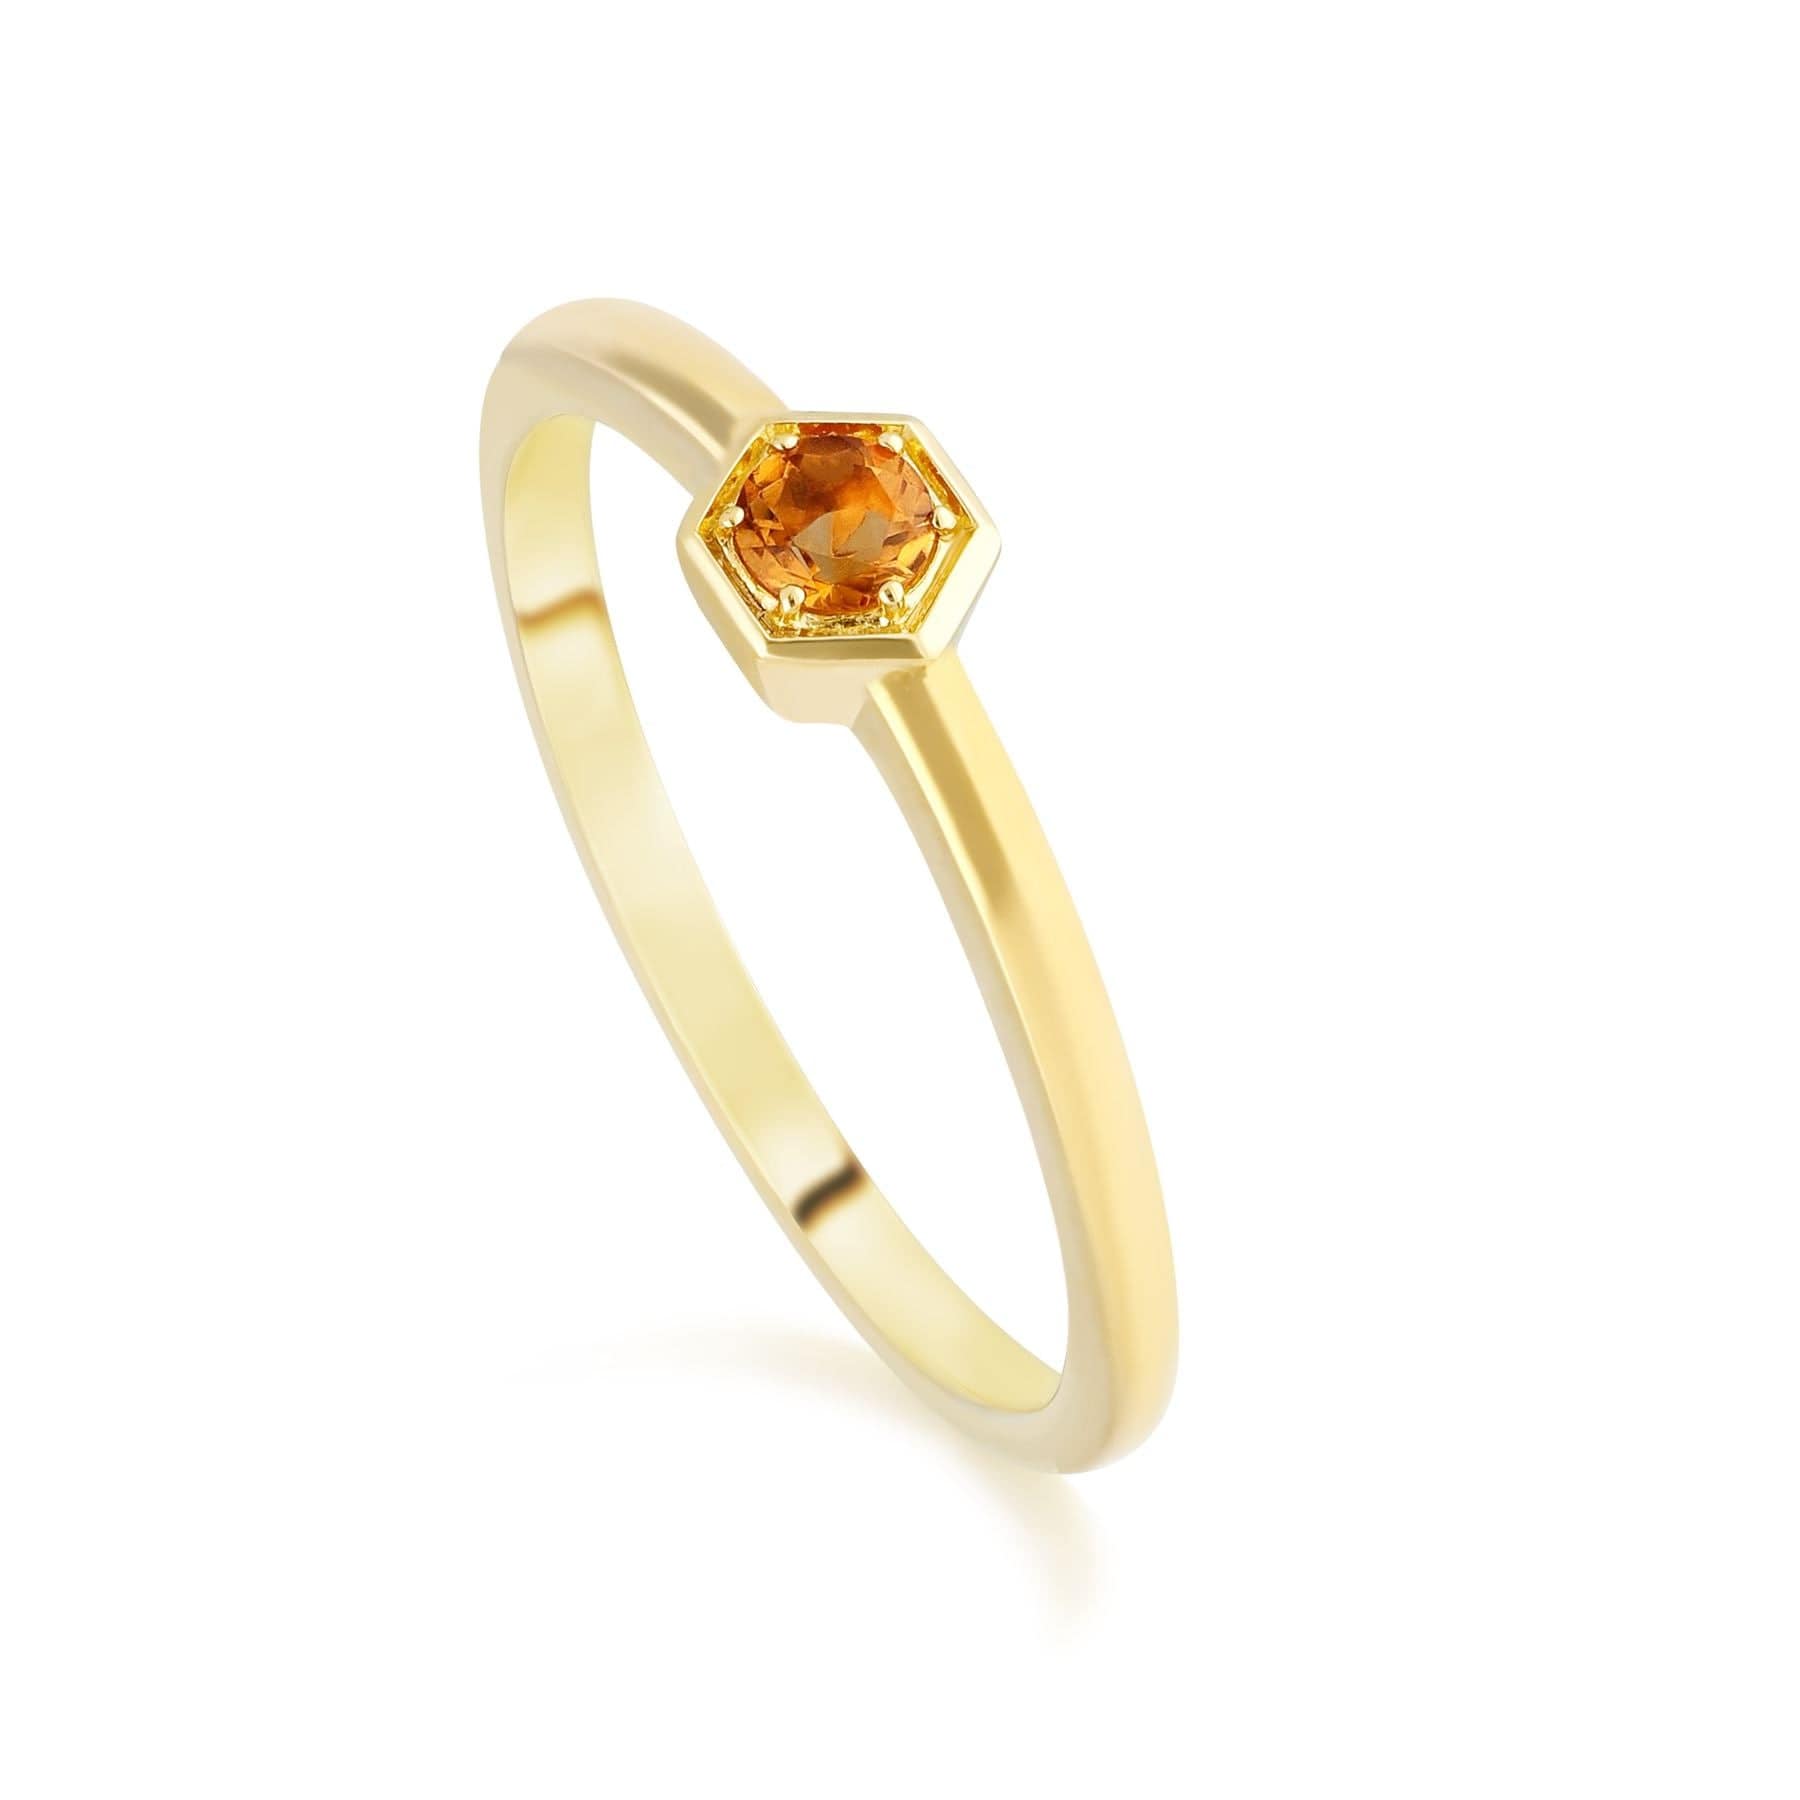 135R1837019 Honeycomb Inspired Citrine Solitaire Ring in 9ct Yellow Gold 1